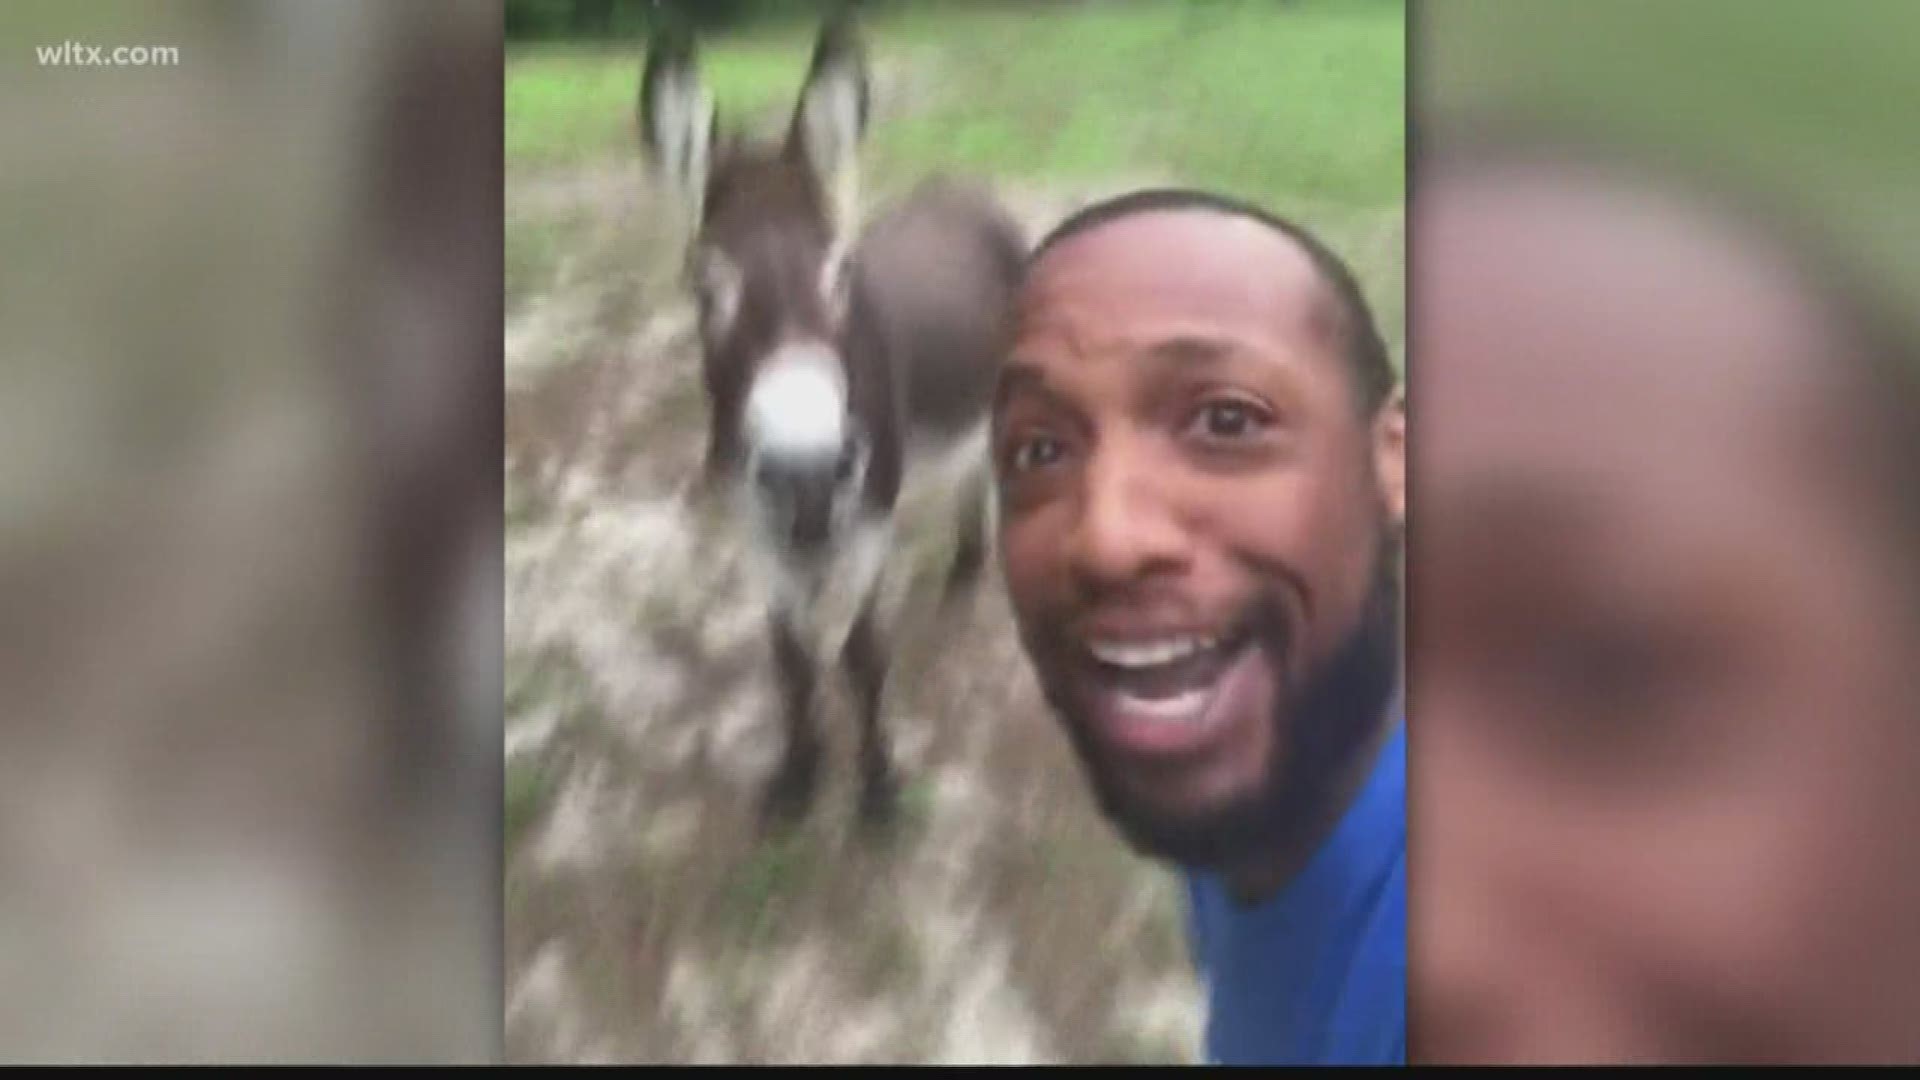 Nathan hadn't sung before, but now there's no stopping the 3-year-old donkey. More: https://on.wltx.com/2ZggYhb